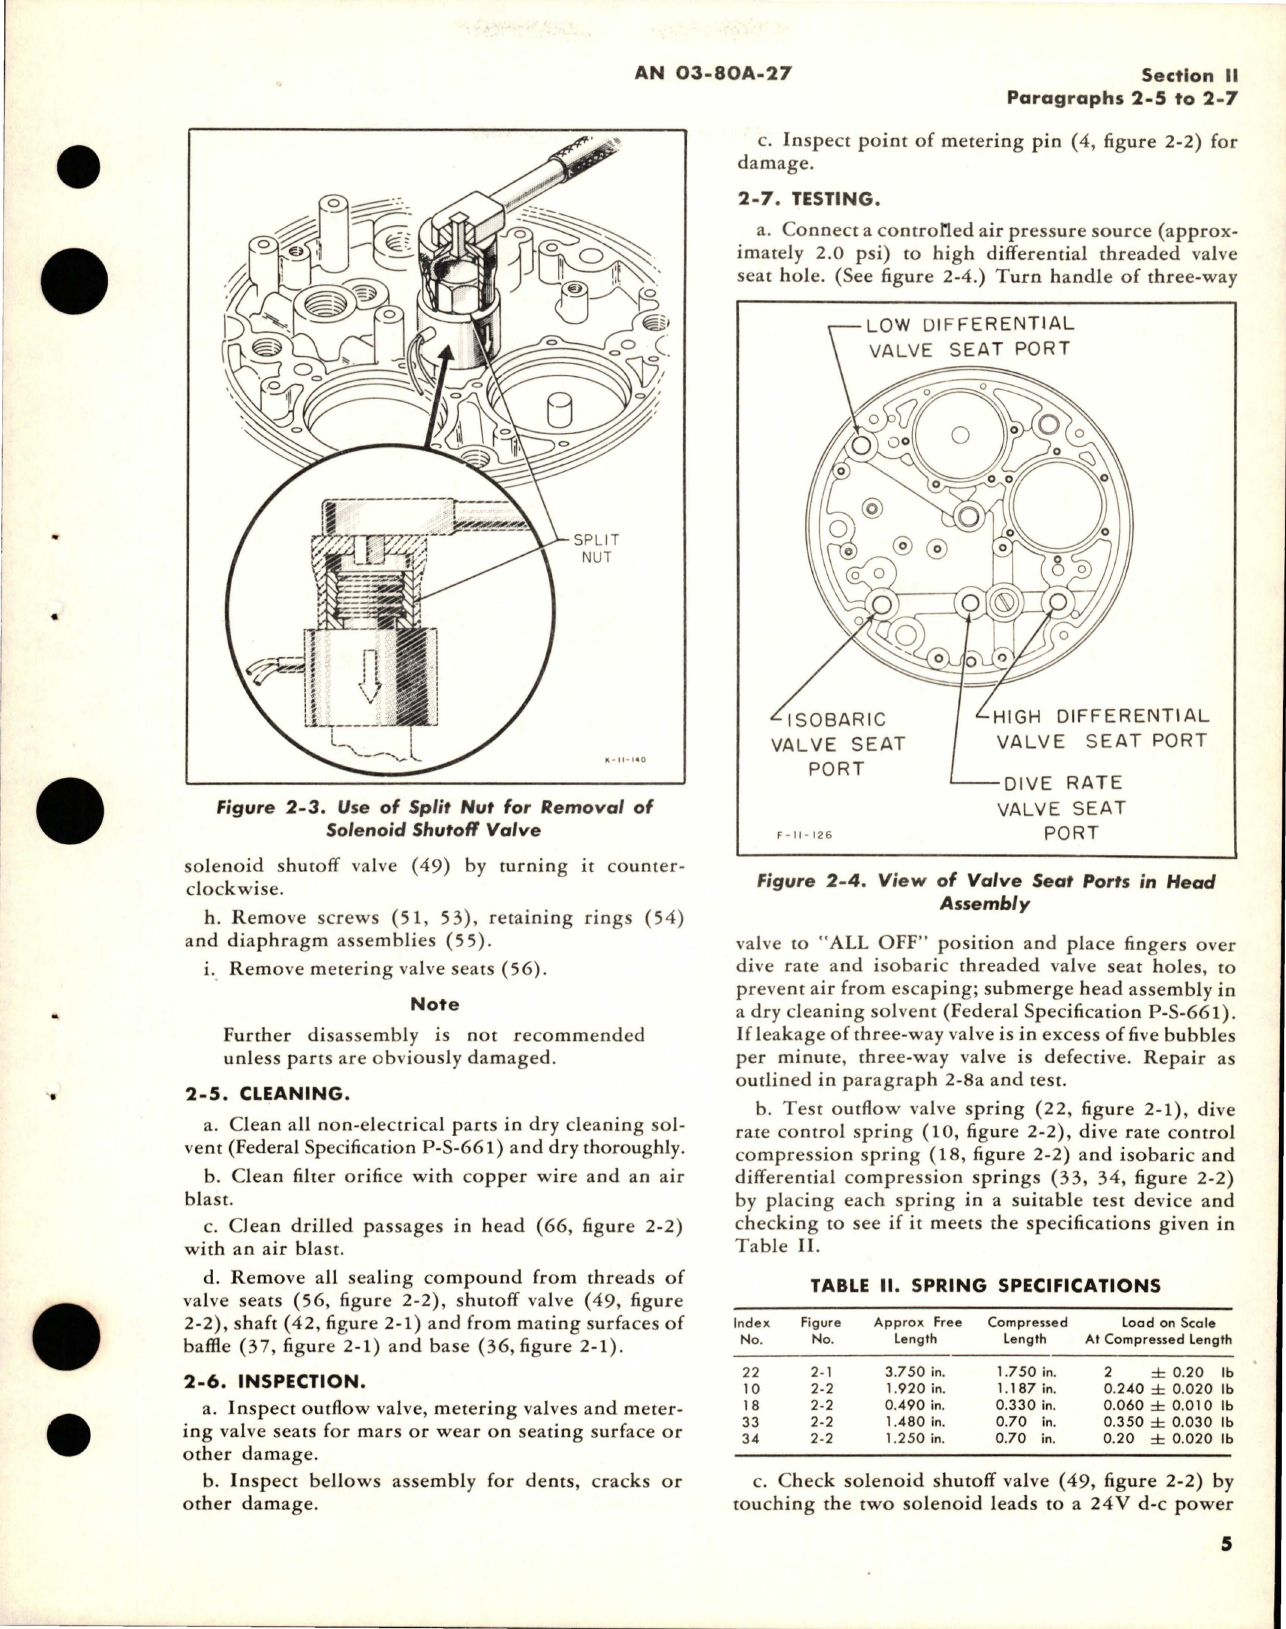 Sample page 9 from AirCorps Library document: Overhaul Instructions for Aircraft Cabin Air Pressure Regulators